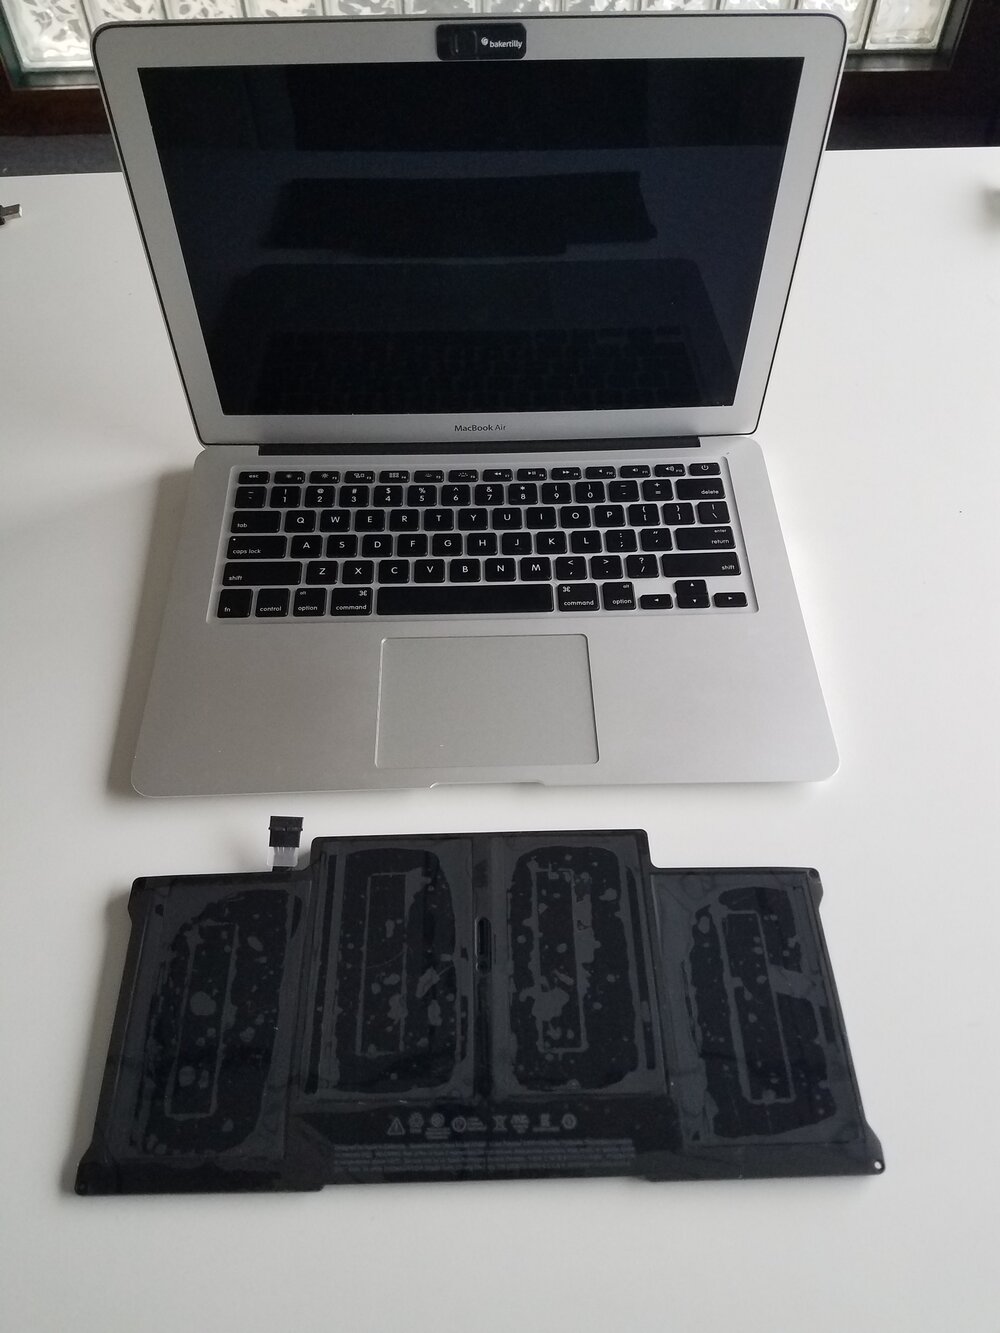 Battery replacement Macbook 13" (Early 2015) — Epoch IT: Computer Repair Allentown, Services, IT, Allentown PA, Lehigh Valley, Bethlehem, Easton